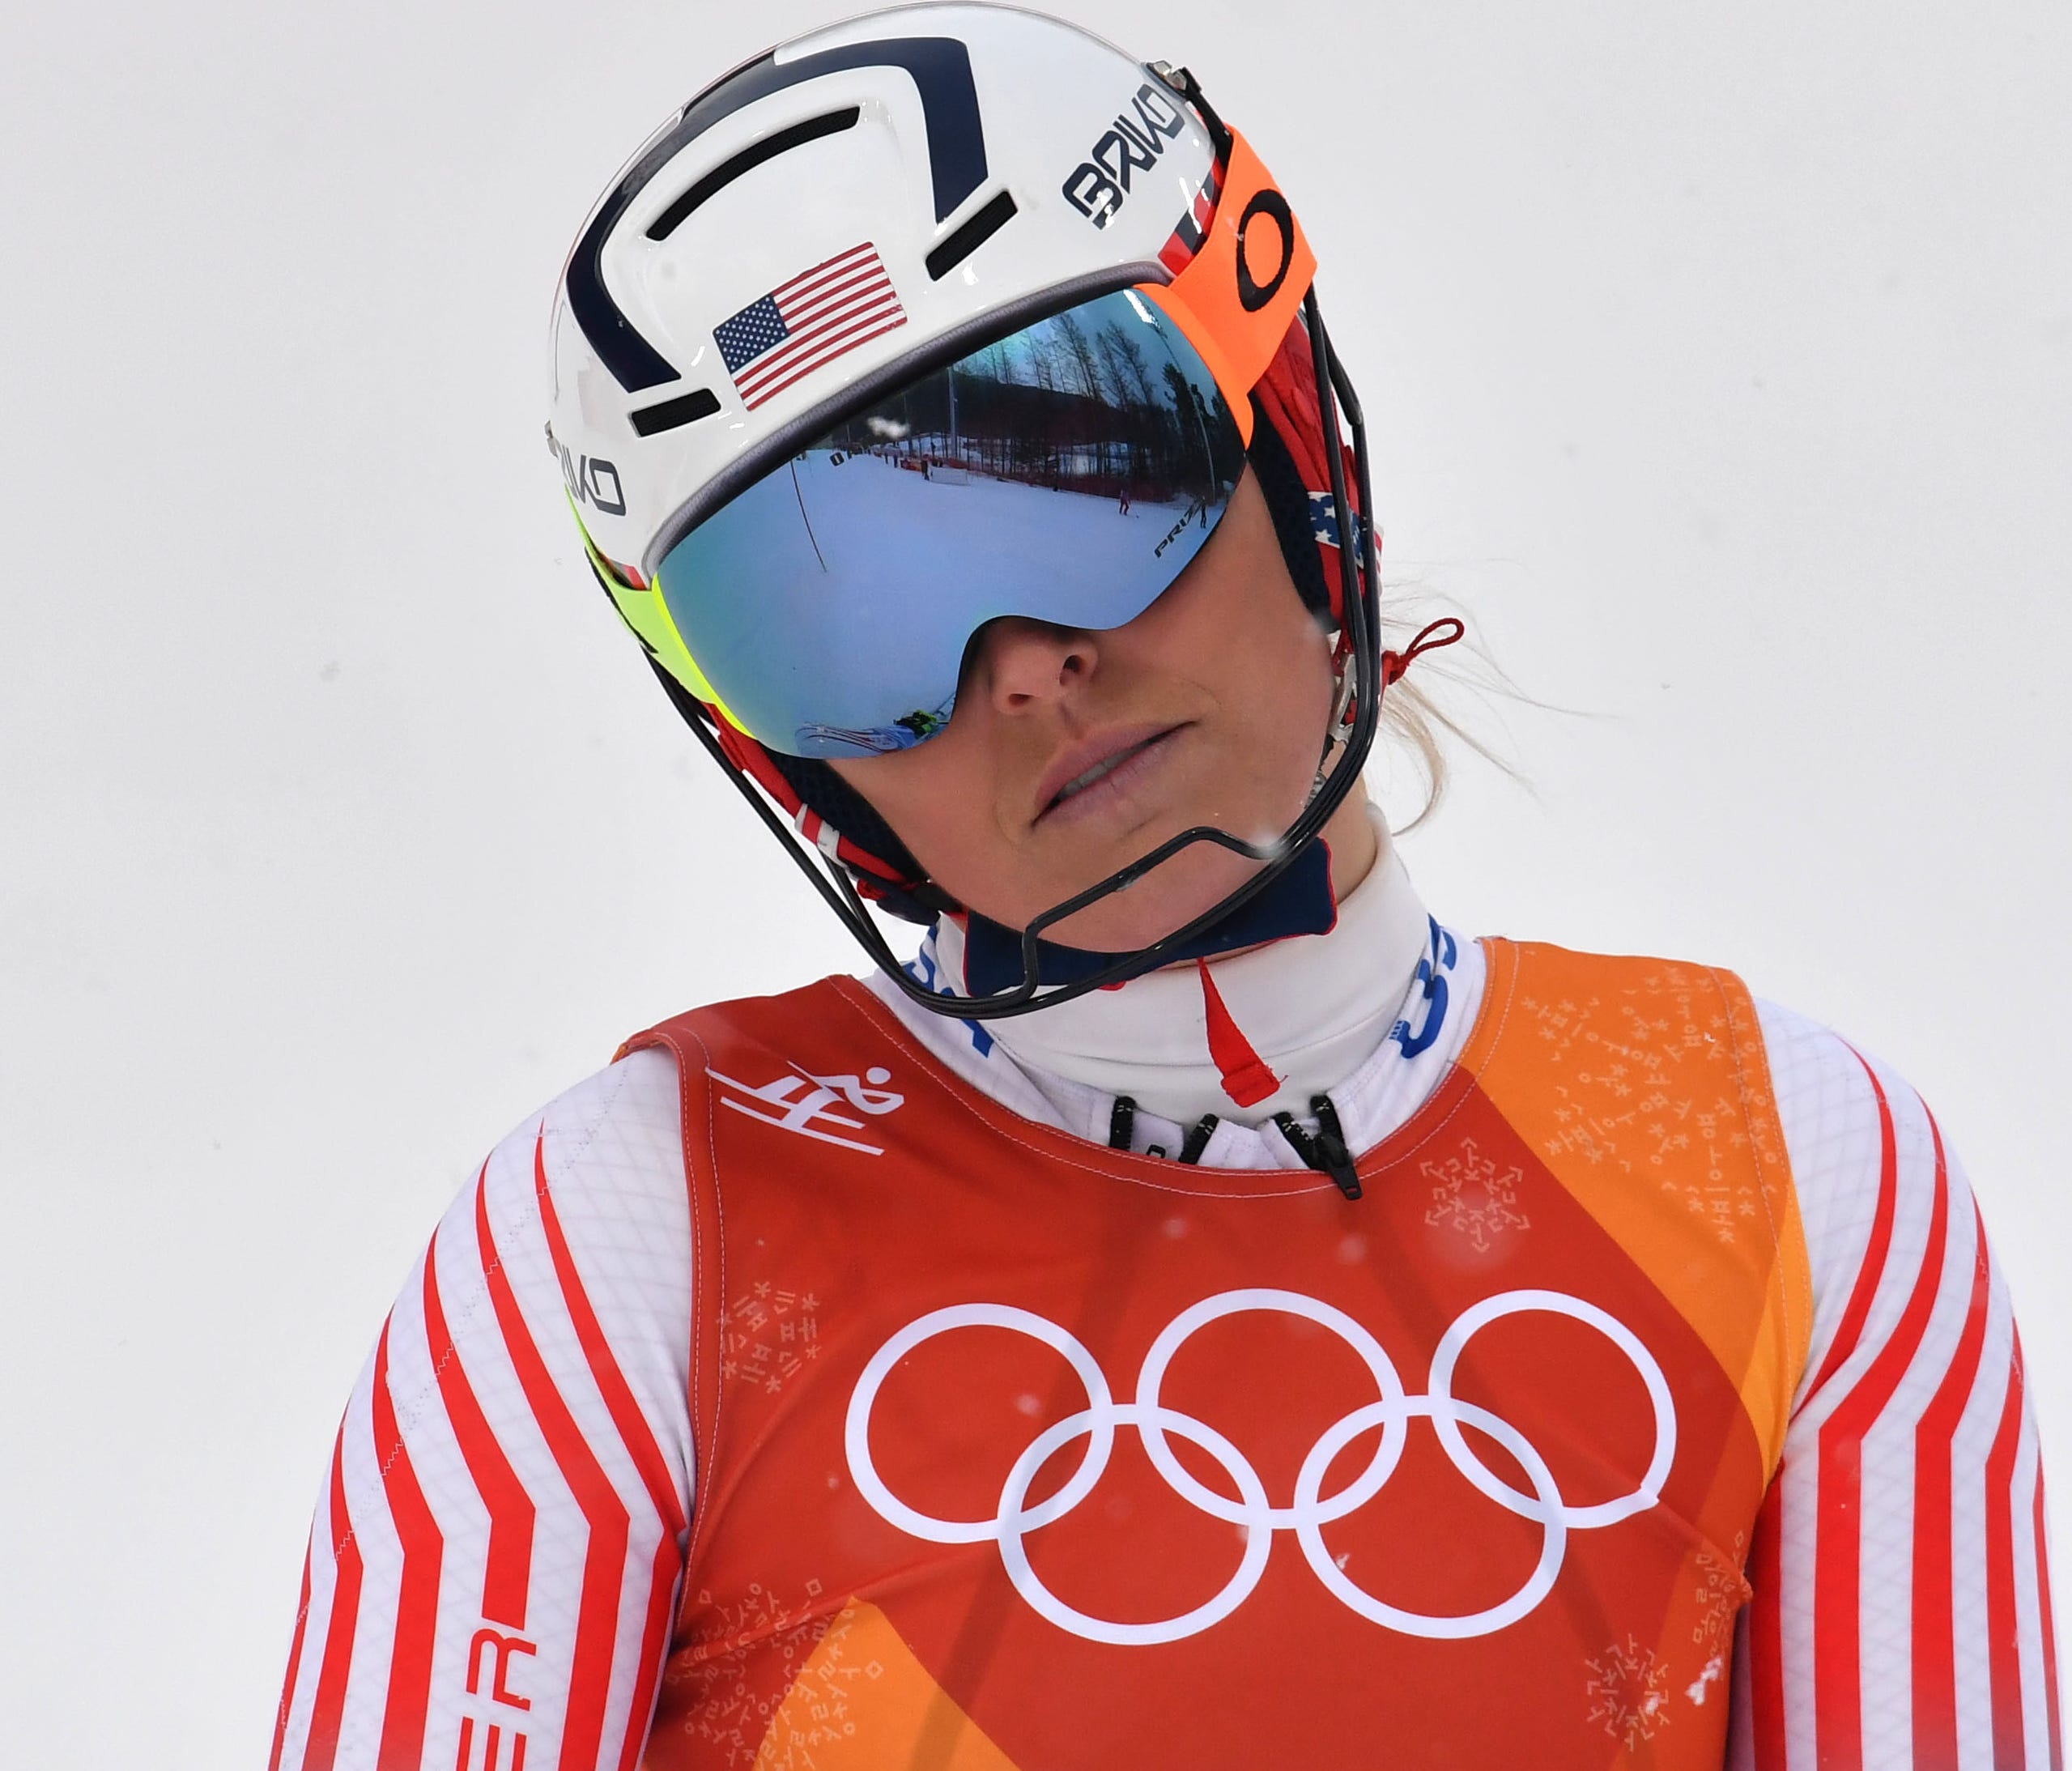 Lindsey Vonn reacts after missing a gate that would cause her not to finish the women's Alpine combined at the Olympics on Thursday.